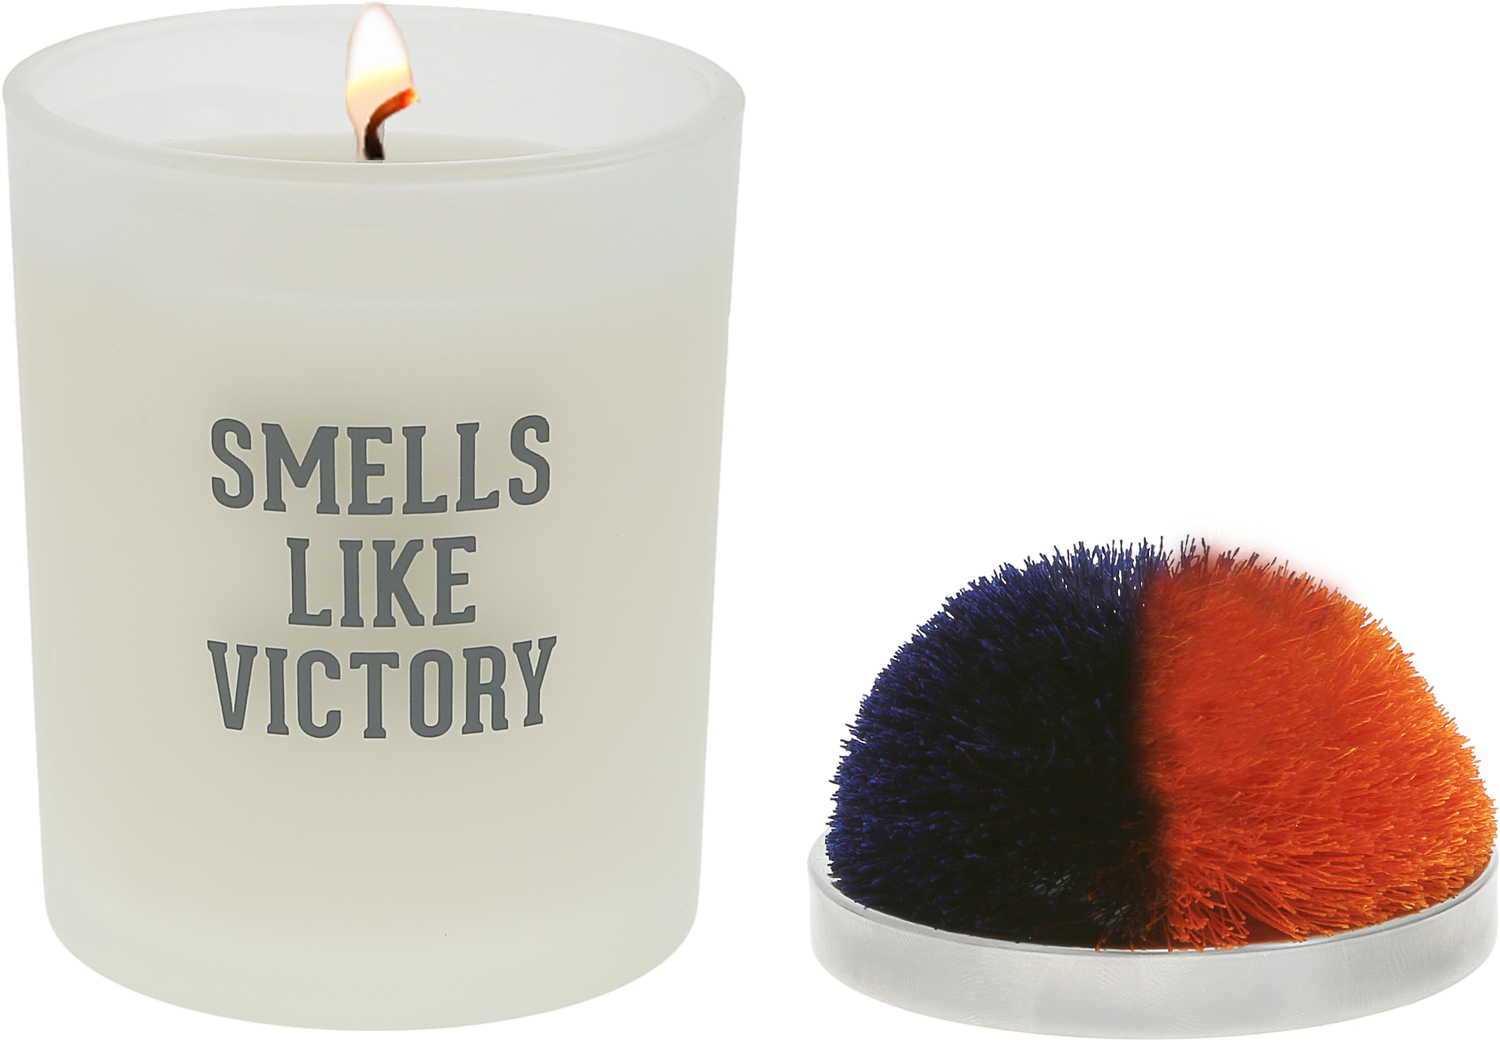 Victory - Navy & Orange by Repre-Scent - Victory - Navy & Orange - 5.5 oz - 100% Soy Wax Candle with Pom Pom Lid
Scent: Tranquility